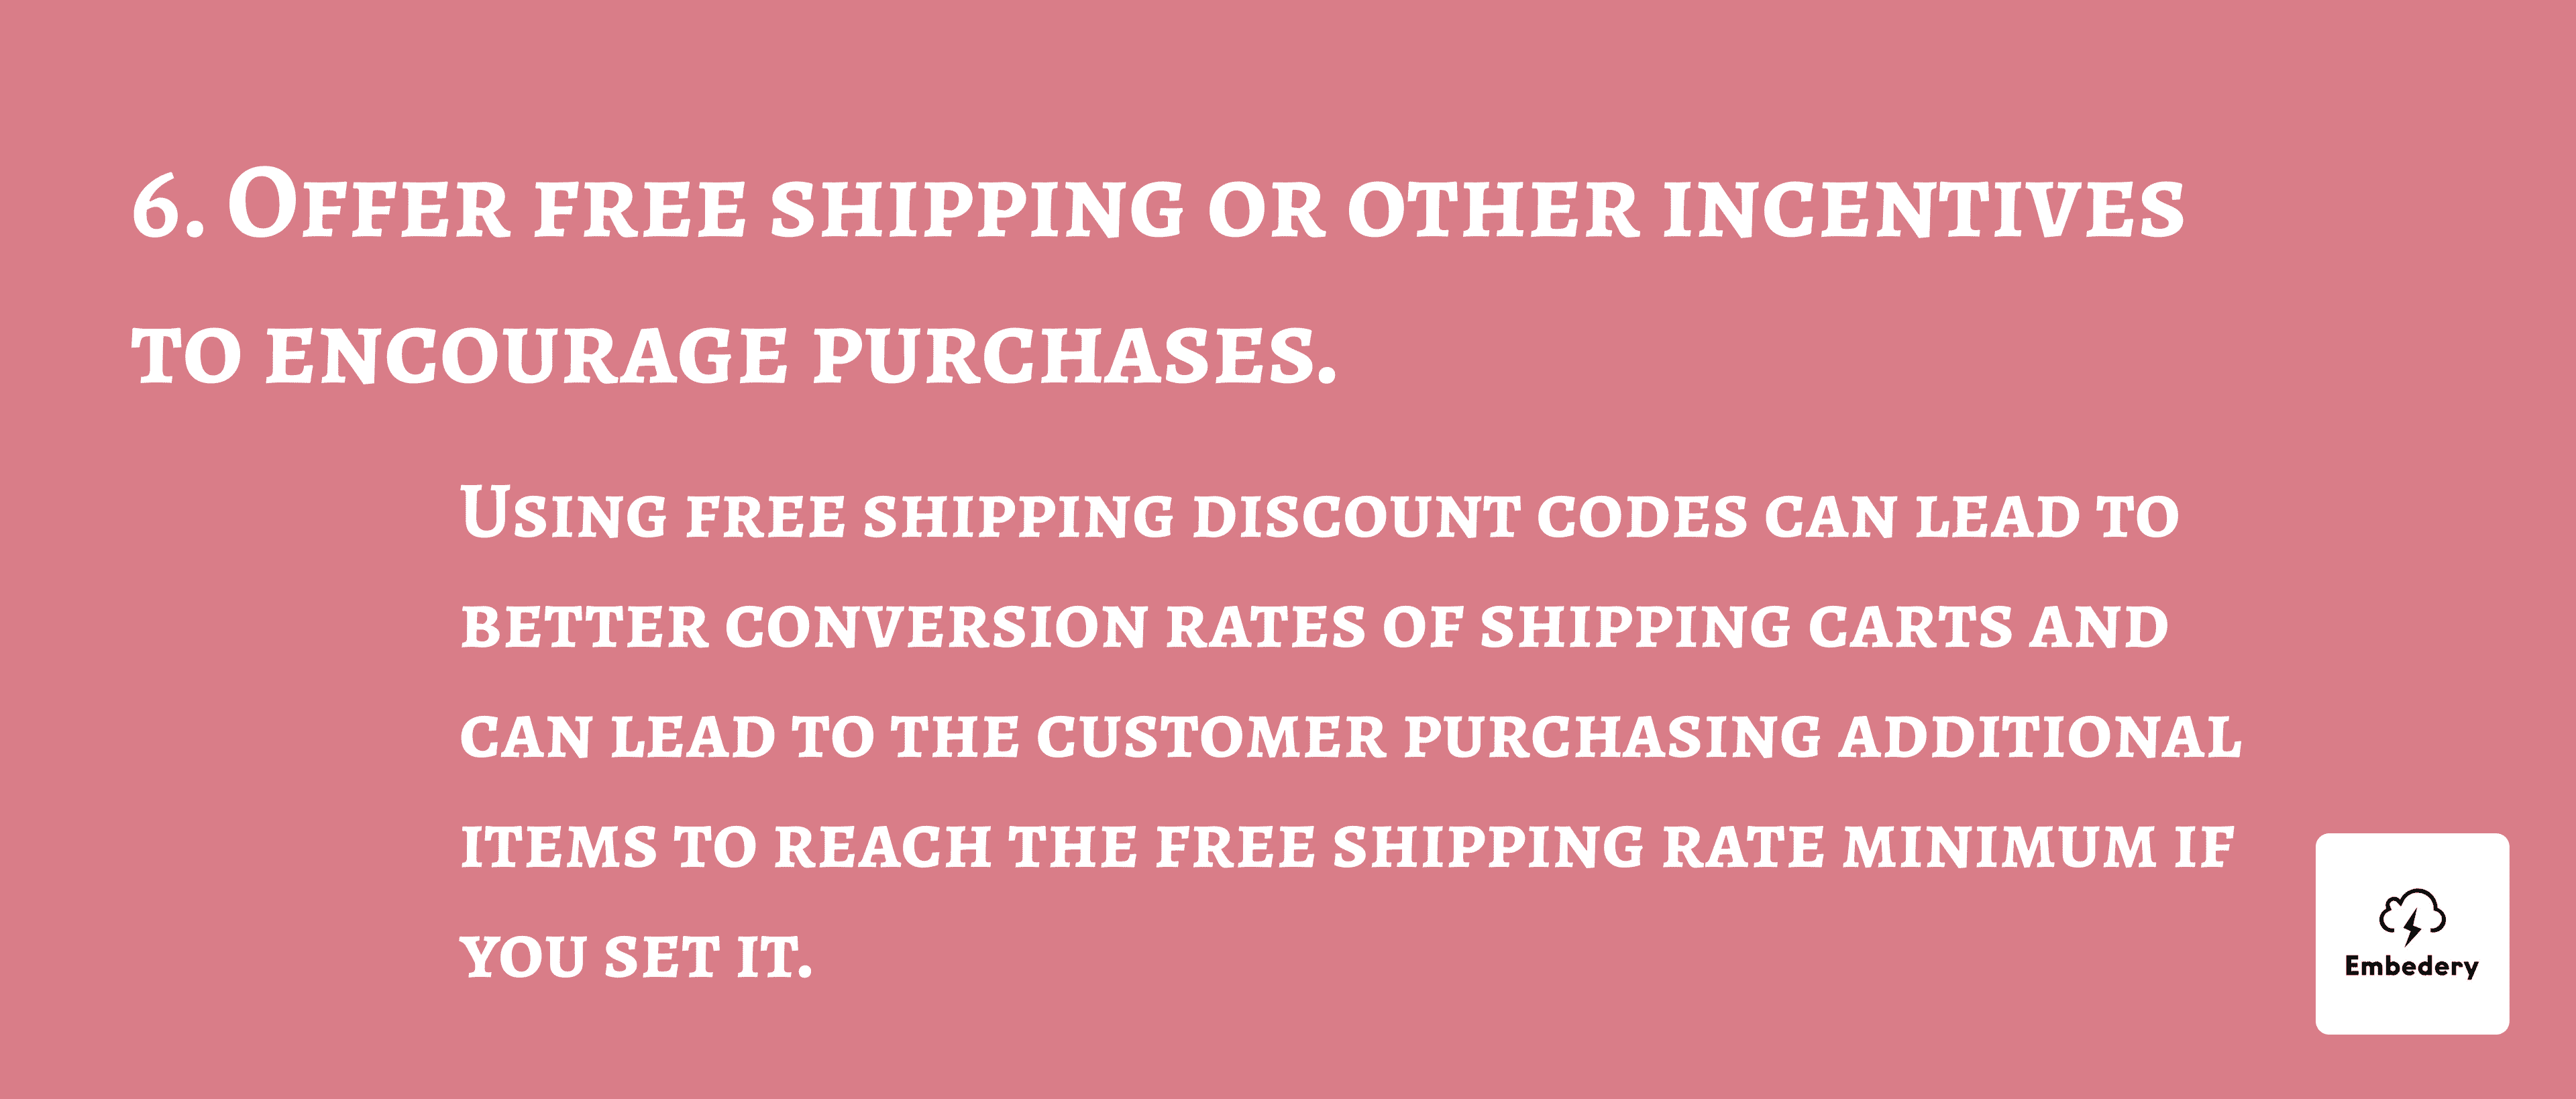 Offer free shipping or other incentives to encourage purchases